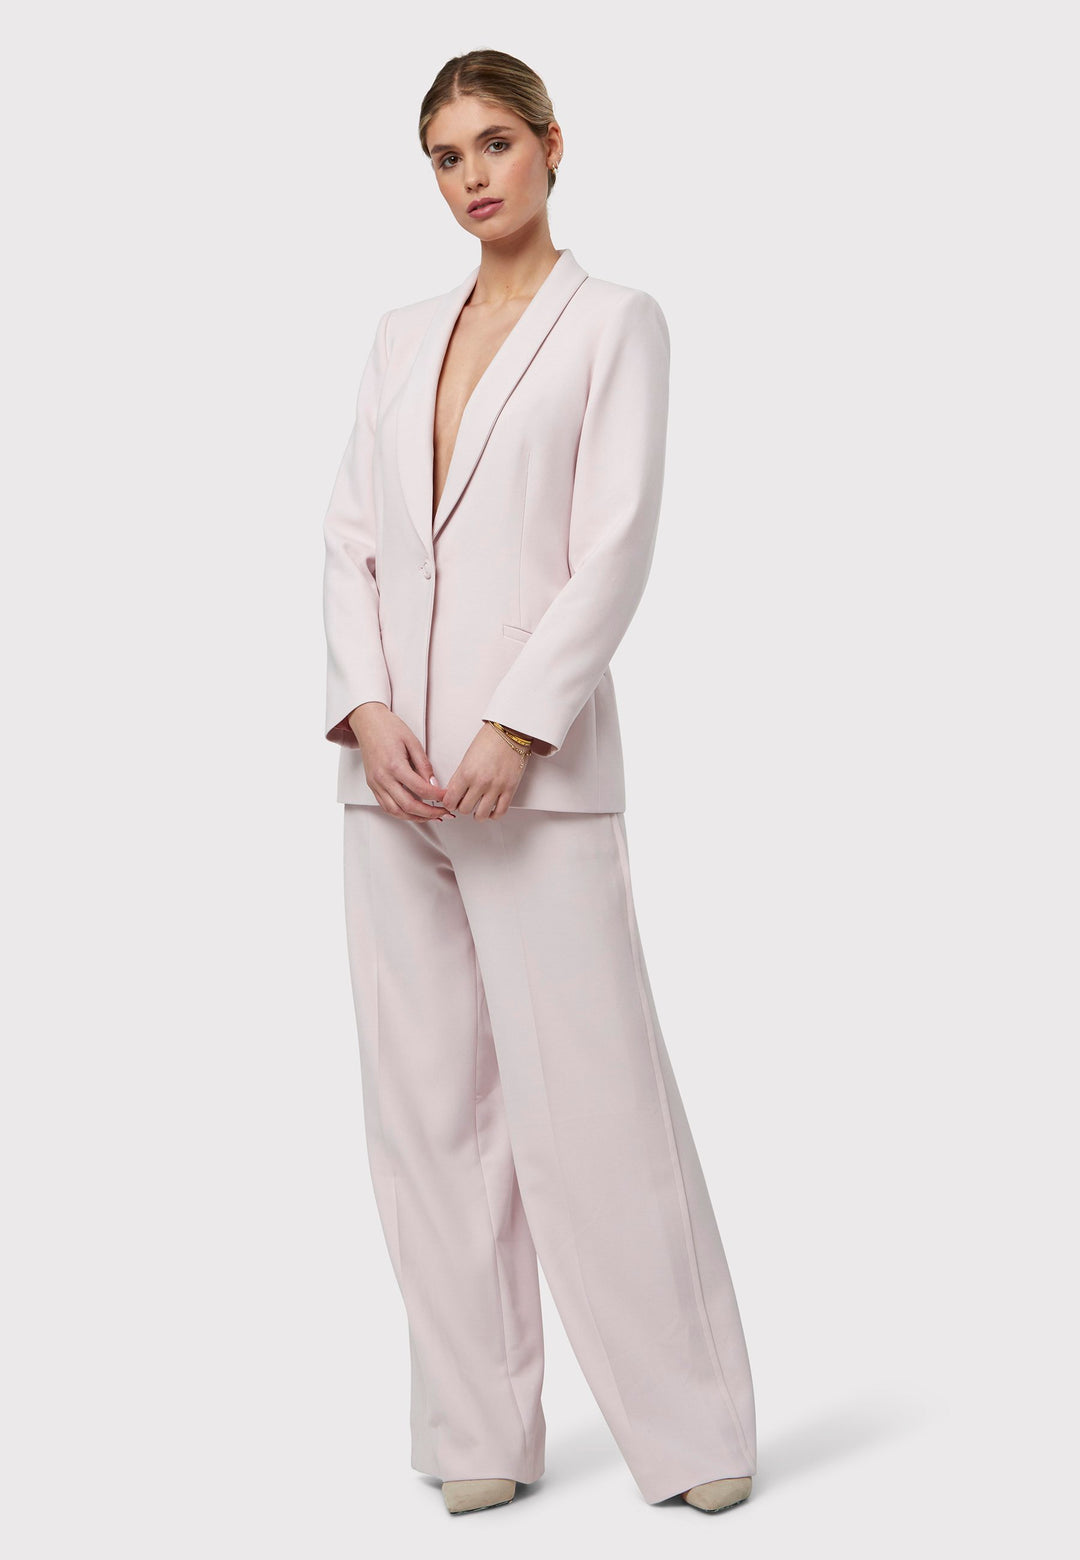 Meet the Darcie Soft Pink Jacket, a chic choice for minimalists. This tuxedo-style jacket boasts a seamless shawl collar, sleek welt pockets, and a flattering semi-fitted silhouette with a single-button closure. Crafted from our signature fabric blend, it offers comfort with a hint of stretch. Pair it with the matching Naomi Soft Pink Tailored Trouser for a complete, polished look.